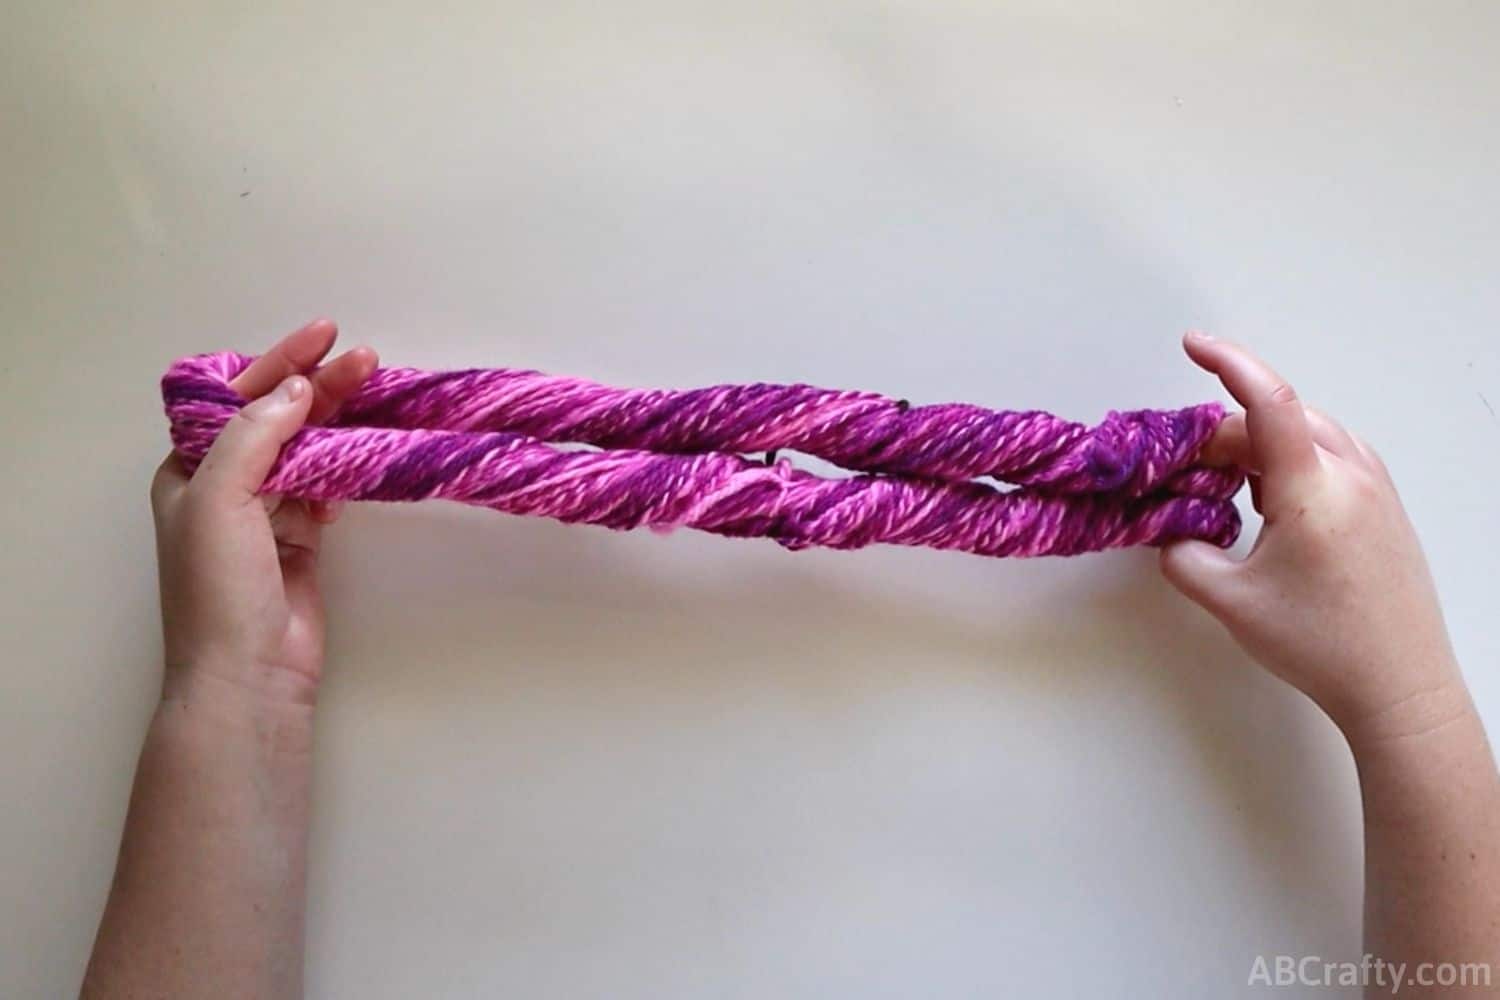 Niddy Noddy Guide - How to Make a Hank and Measure Yarn - AB Crafty